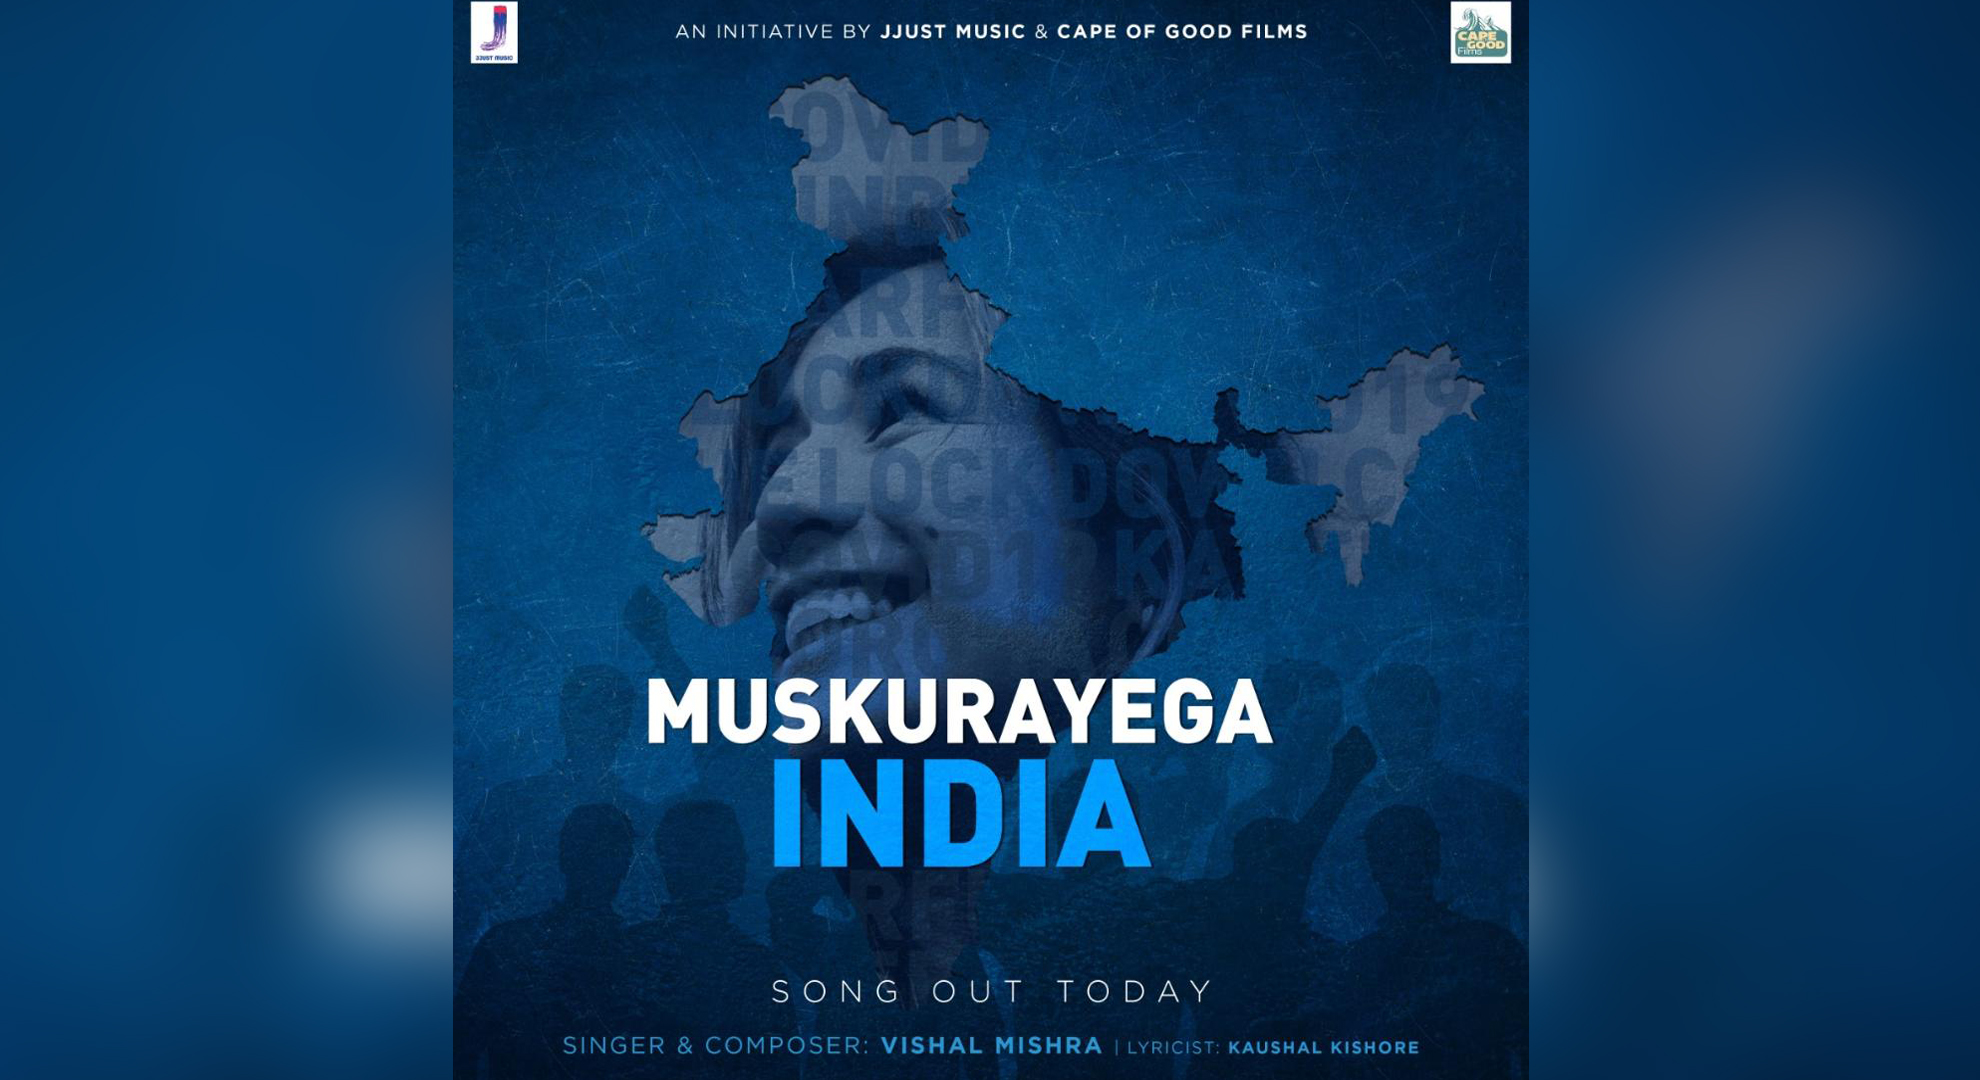 While we are all home-quarantined, but nothing could deter Bollywood’s spirit to bring ‘Muskurayega India’ helmed by Akshay Kumar and Jackky Bhagnani’s Label Jjust Music